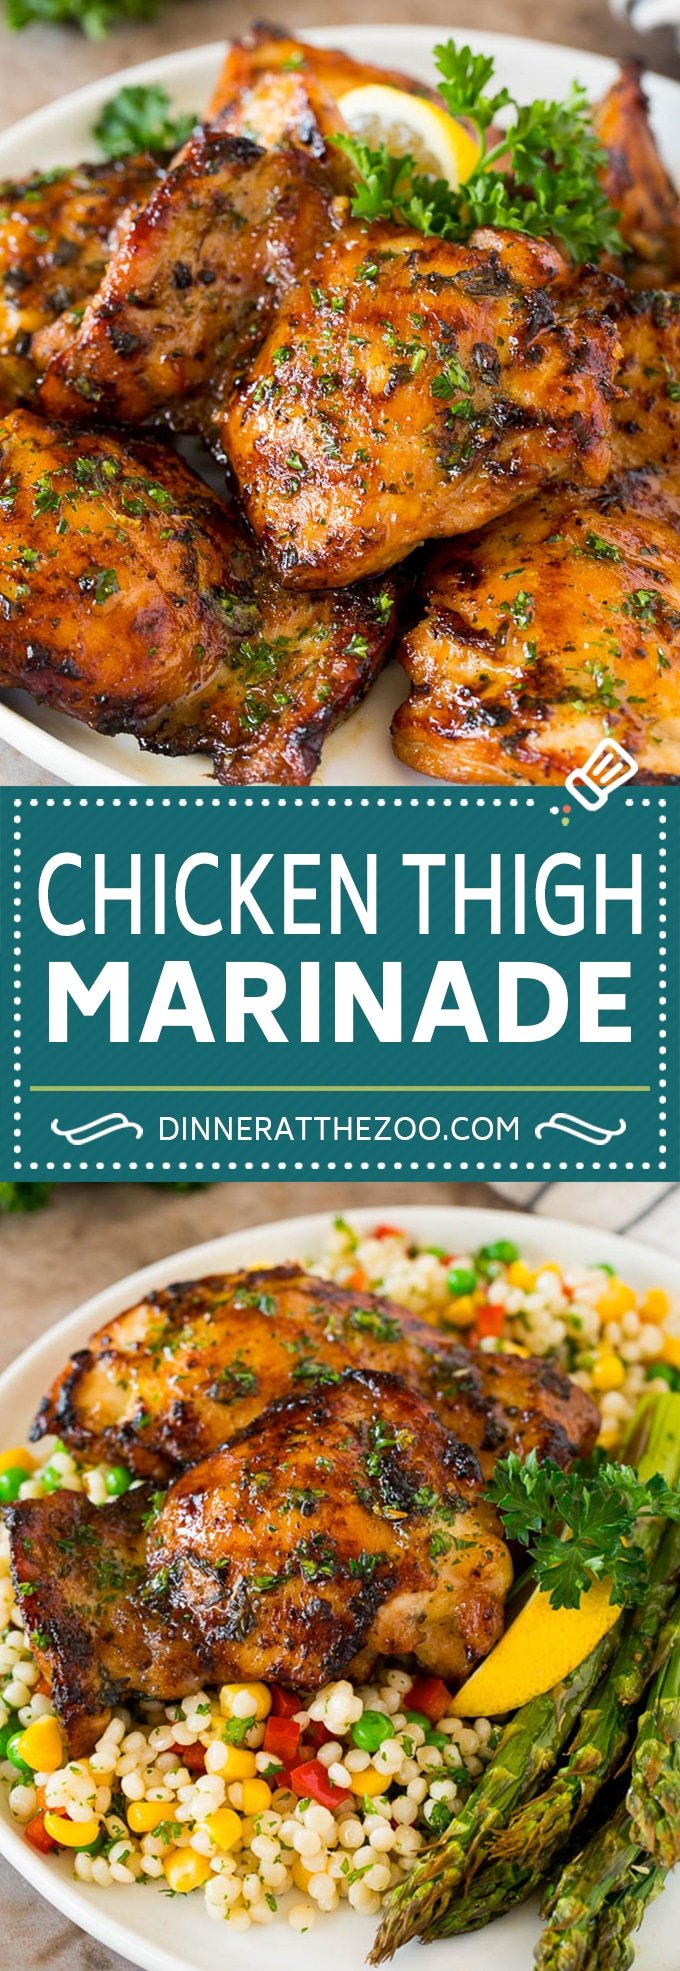 This chicken thigh marinade is a savory blend of fresh herbs, garlic, olive oil, lemon and seasonings.